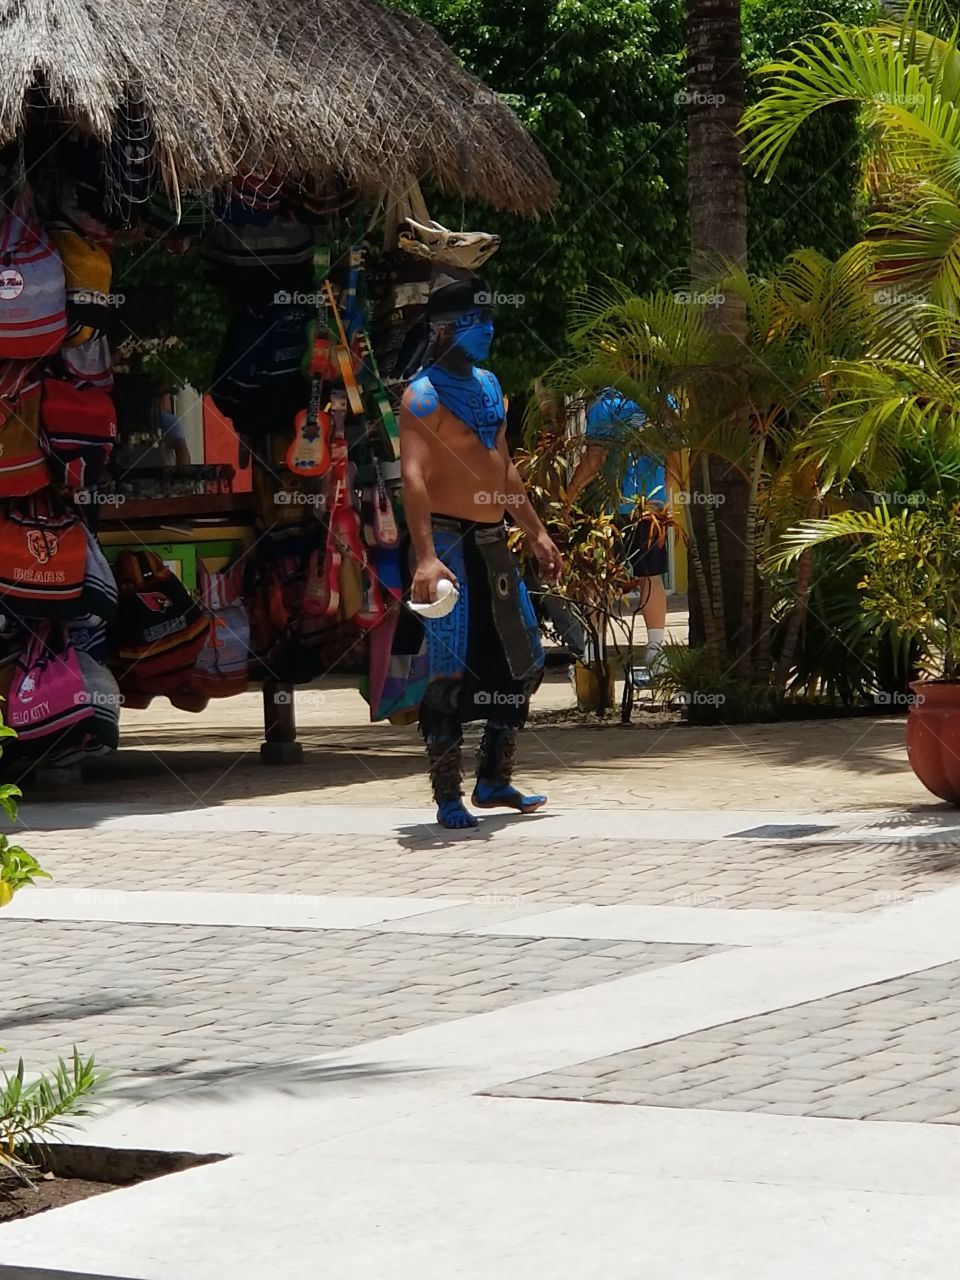 The streets of Cozumel Mexico!